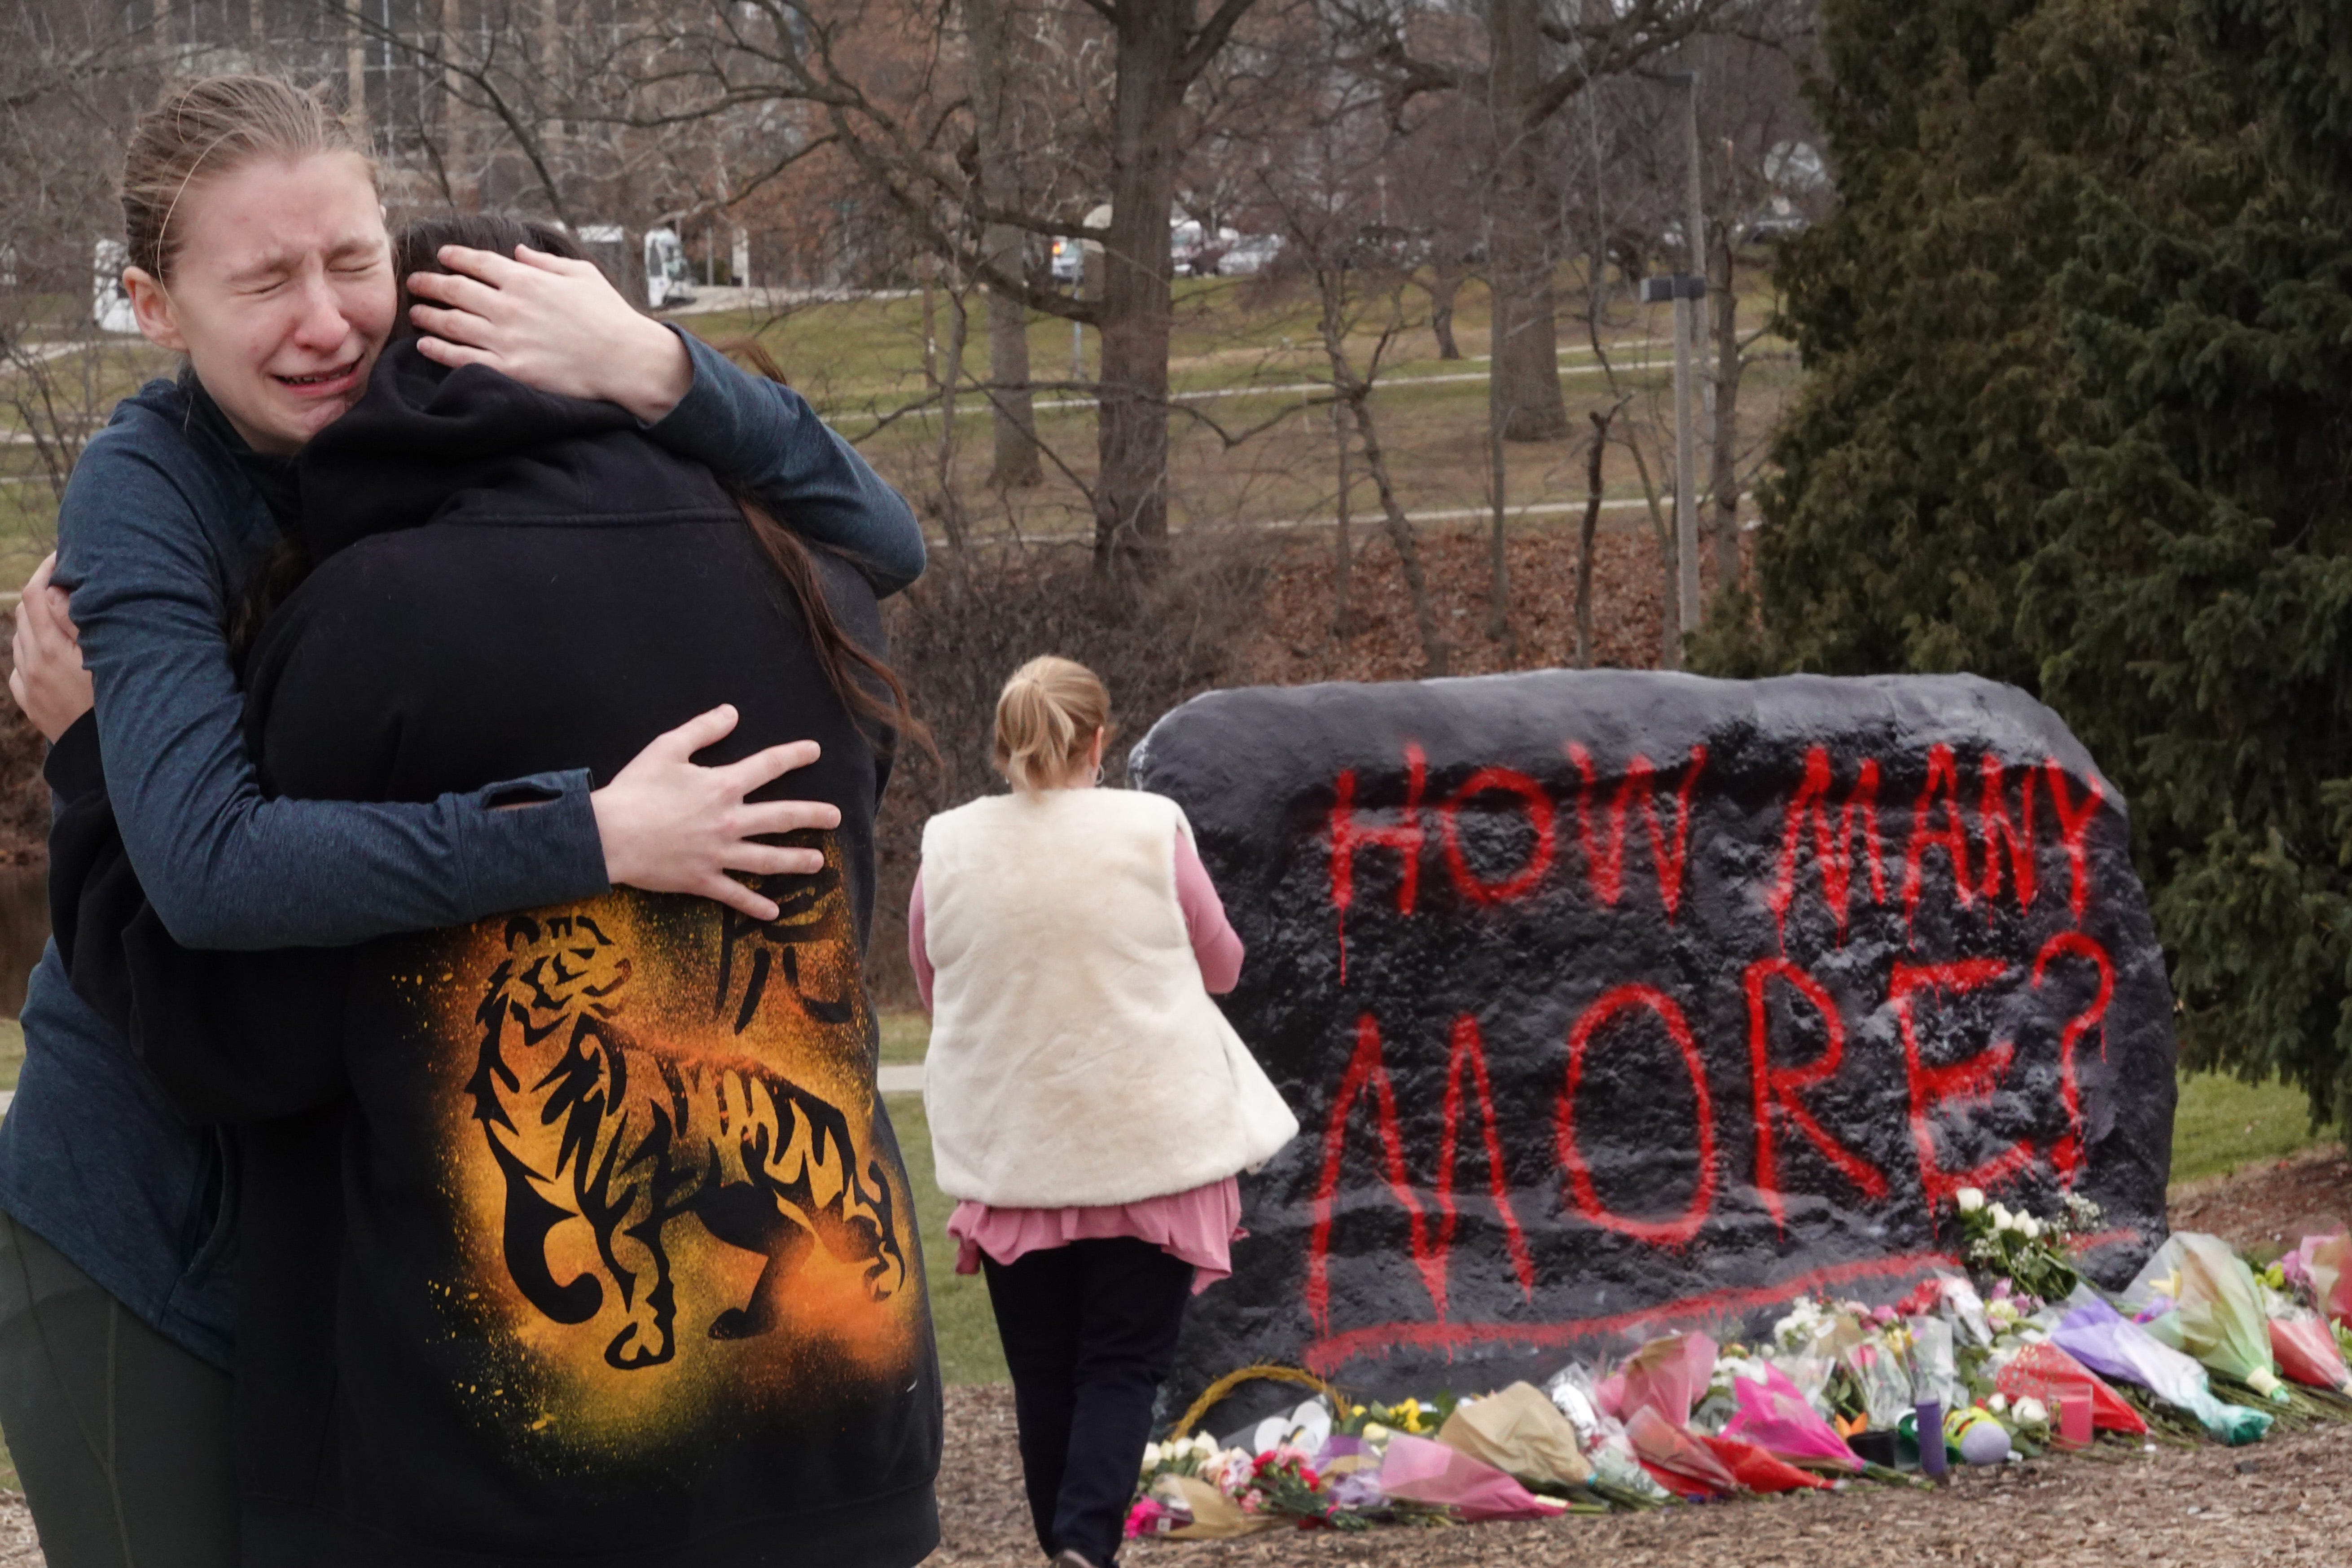 People leave flowers, hug and pray at a makeshift memorial at "The Rock" on the campus of Michigan State University on February 14, 2023 in Lansing, Michigan.